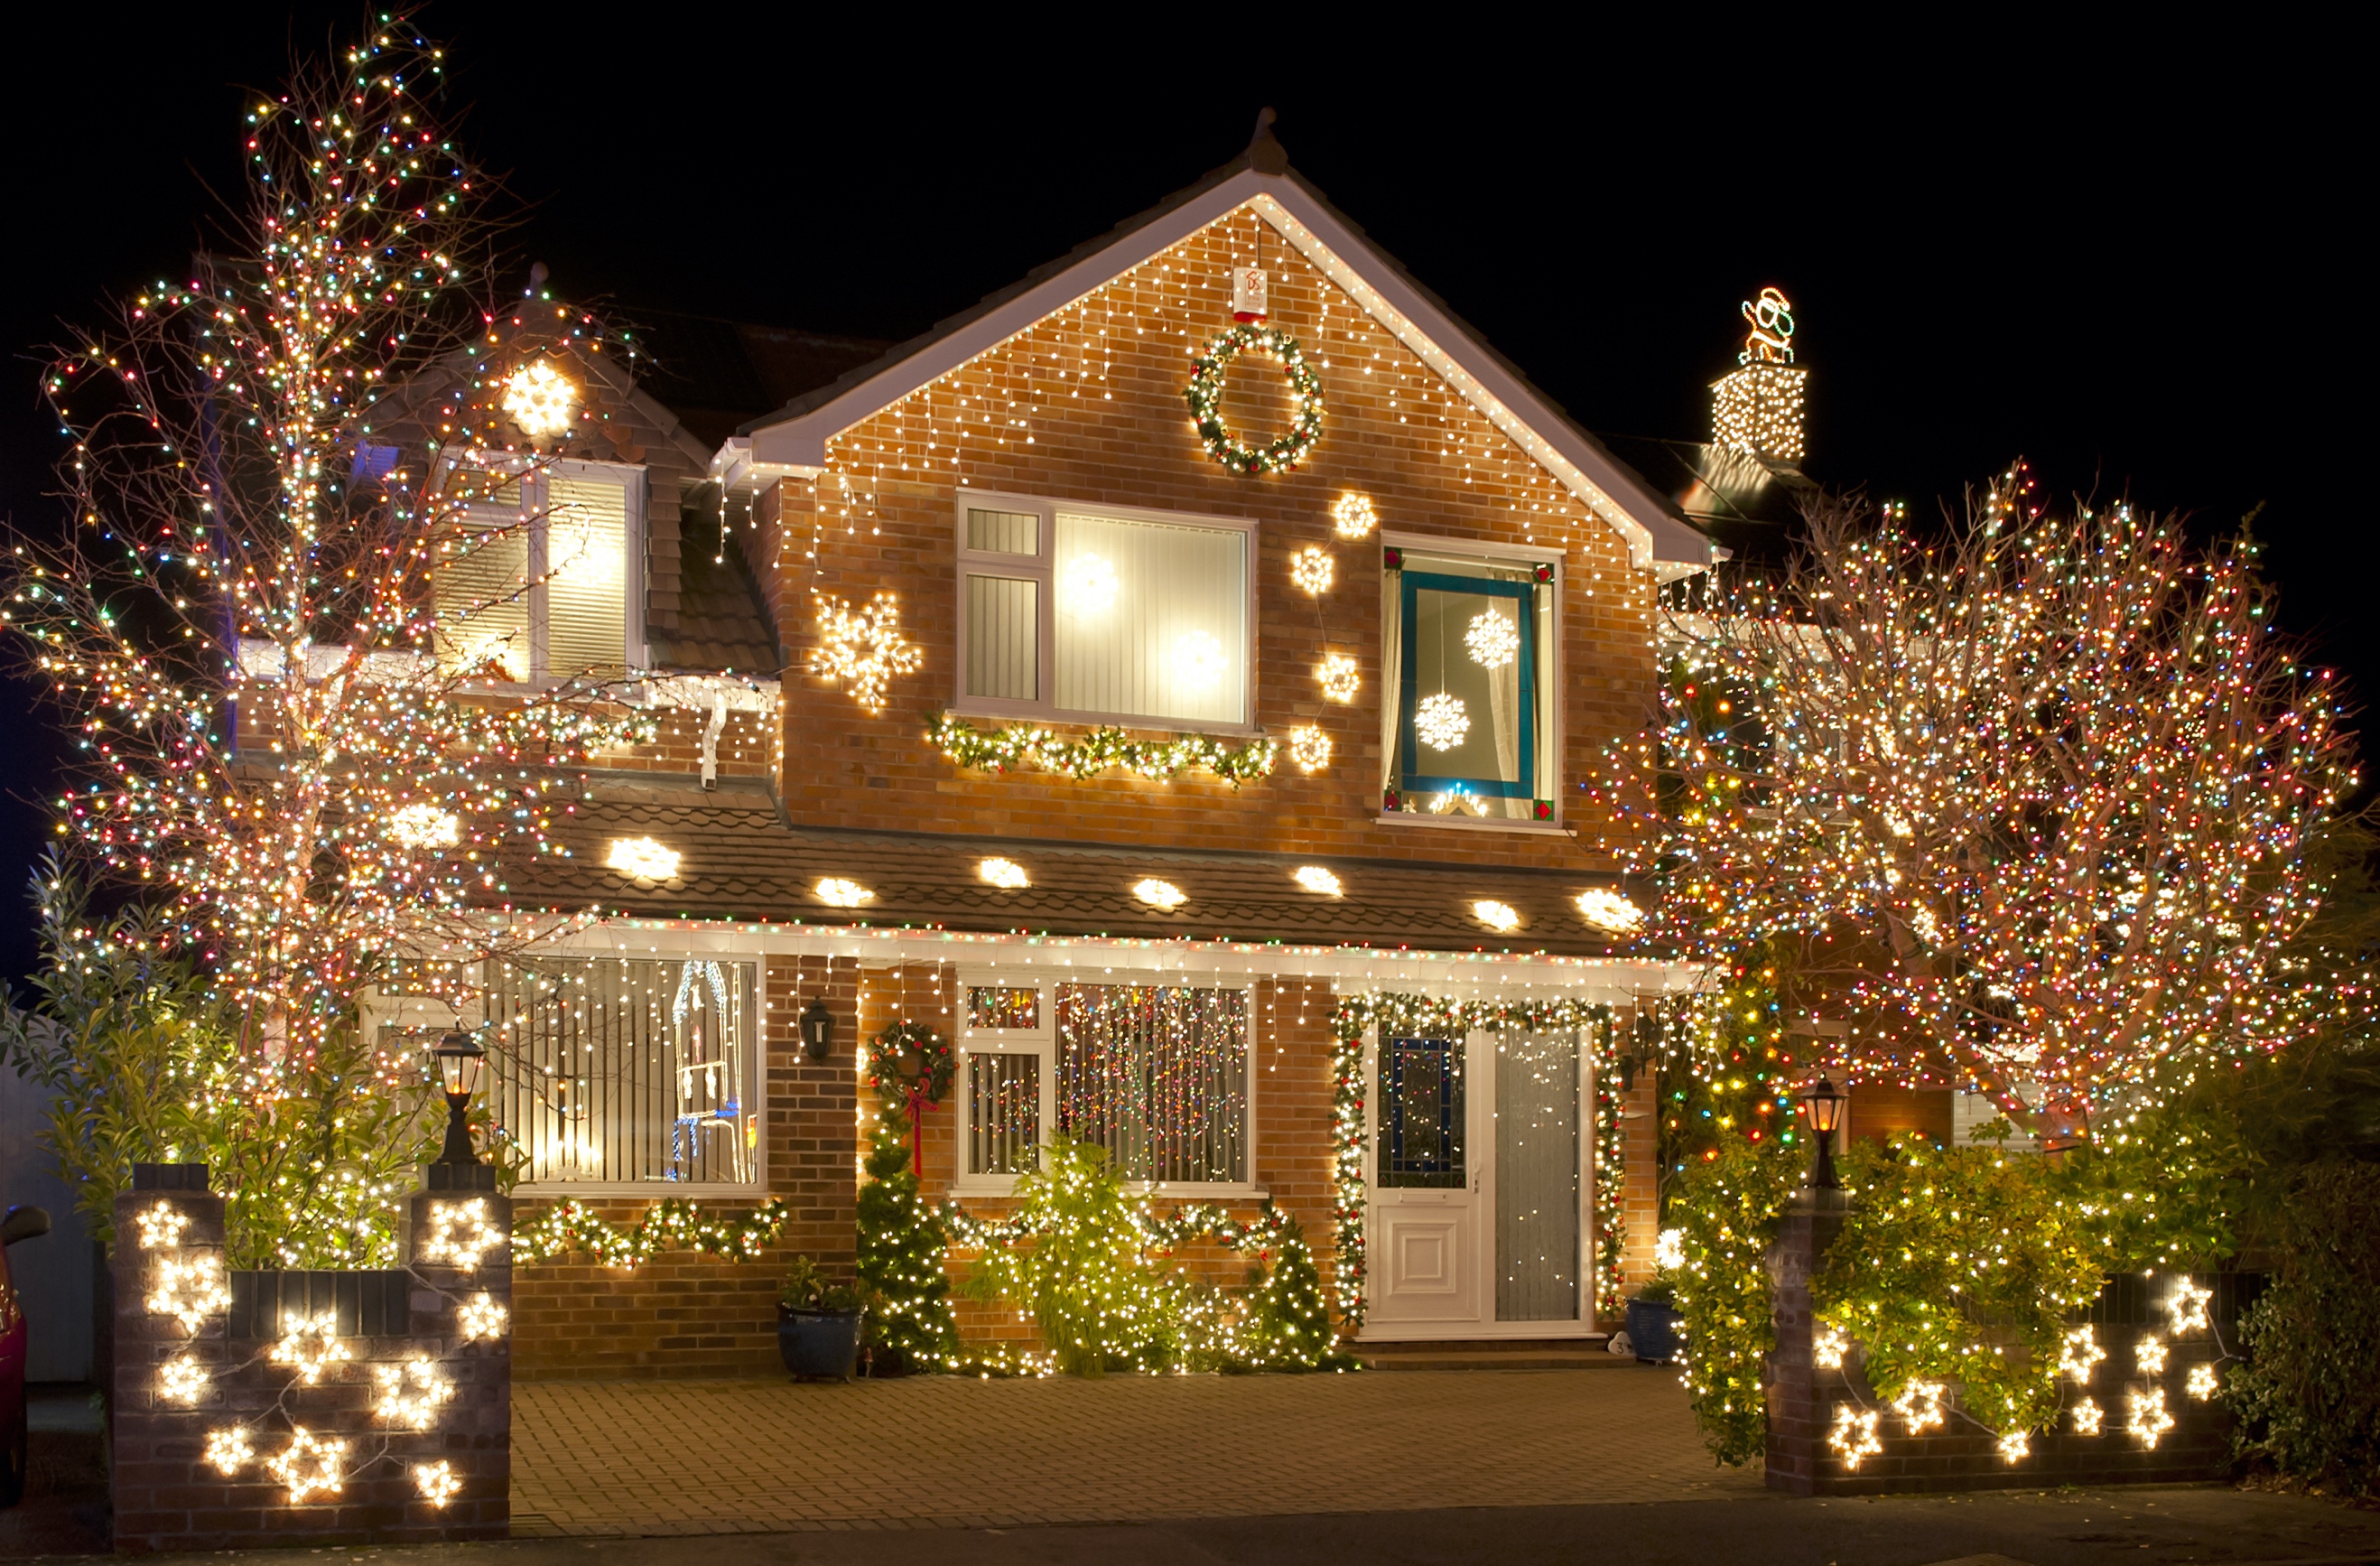 Christmas lights installed by a roofing company